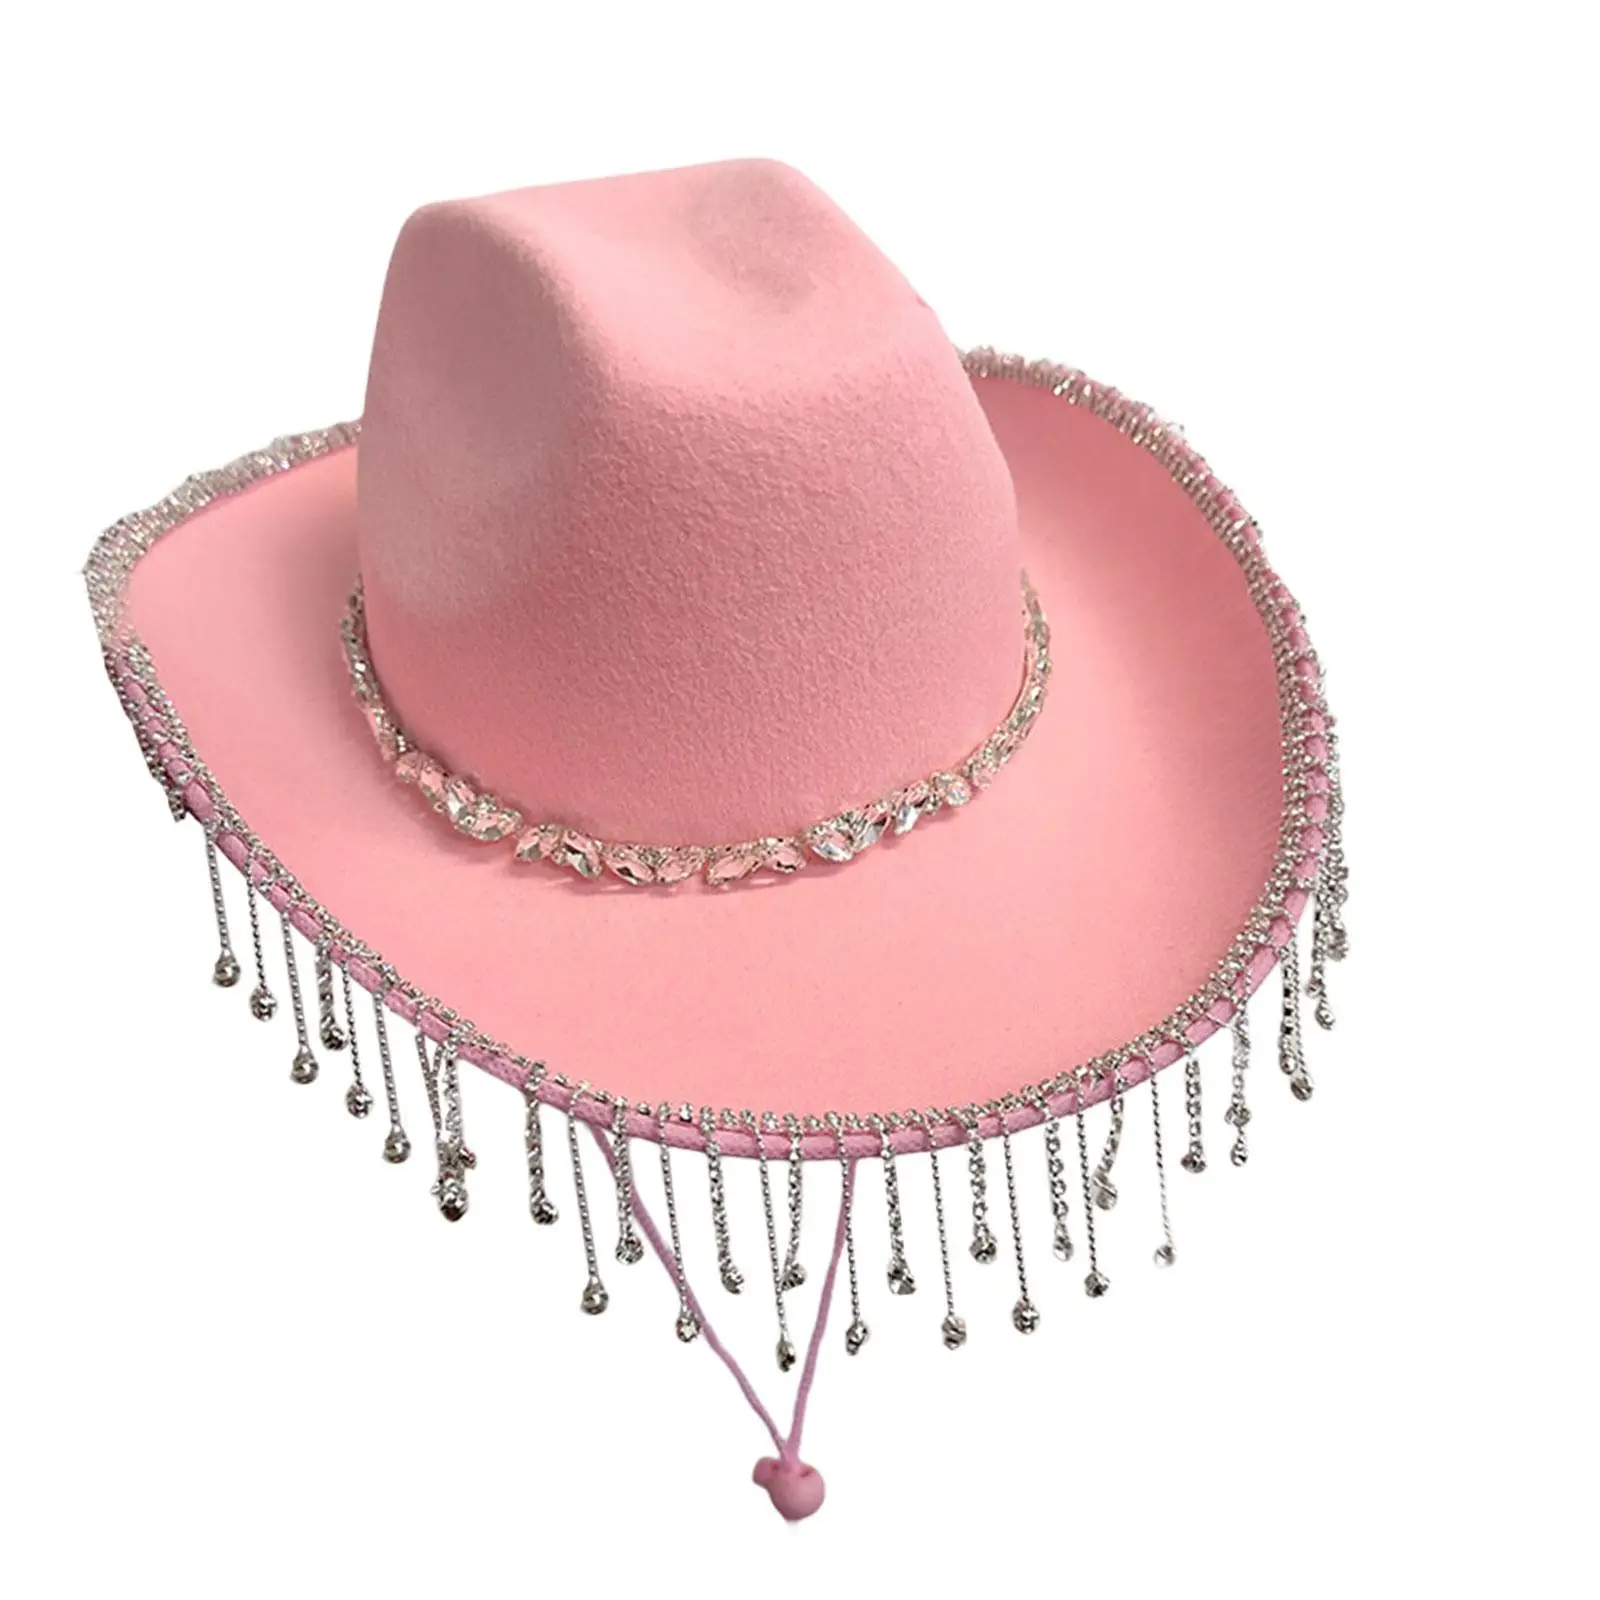 Western Cowboy Hat Beach Sunshade Events Dress up Camping Photo Props Women Casual Decorative Wide Brim Hat Cowgirl Hat